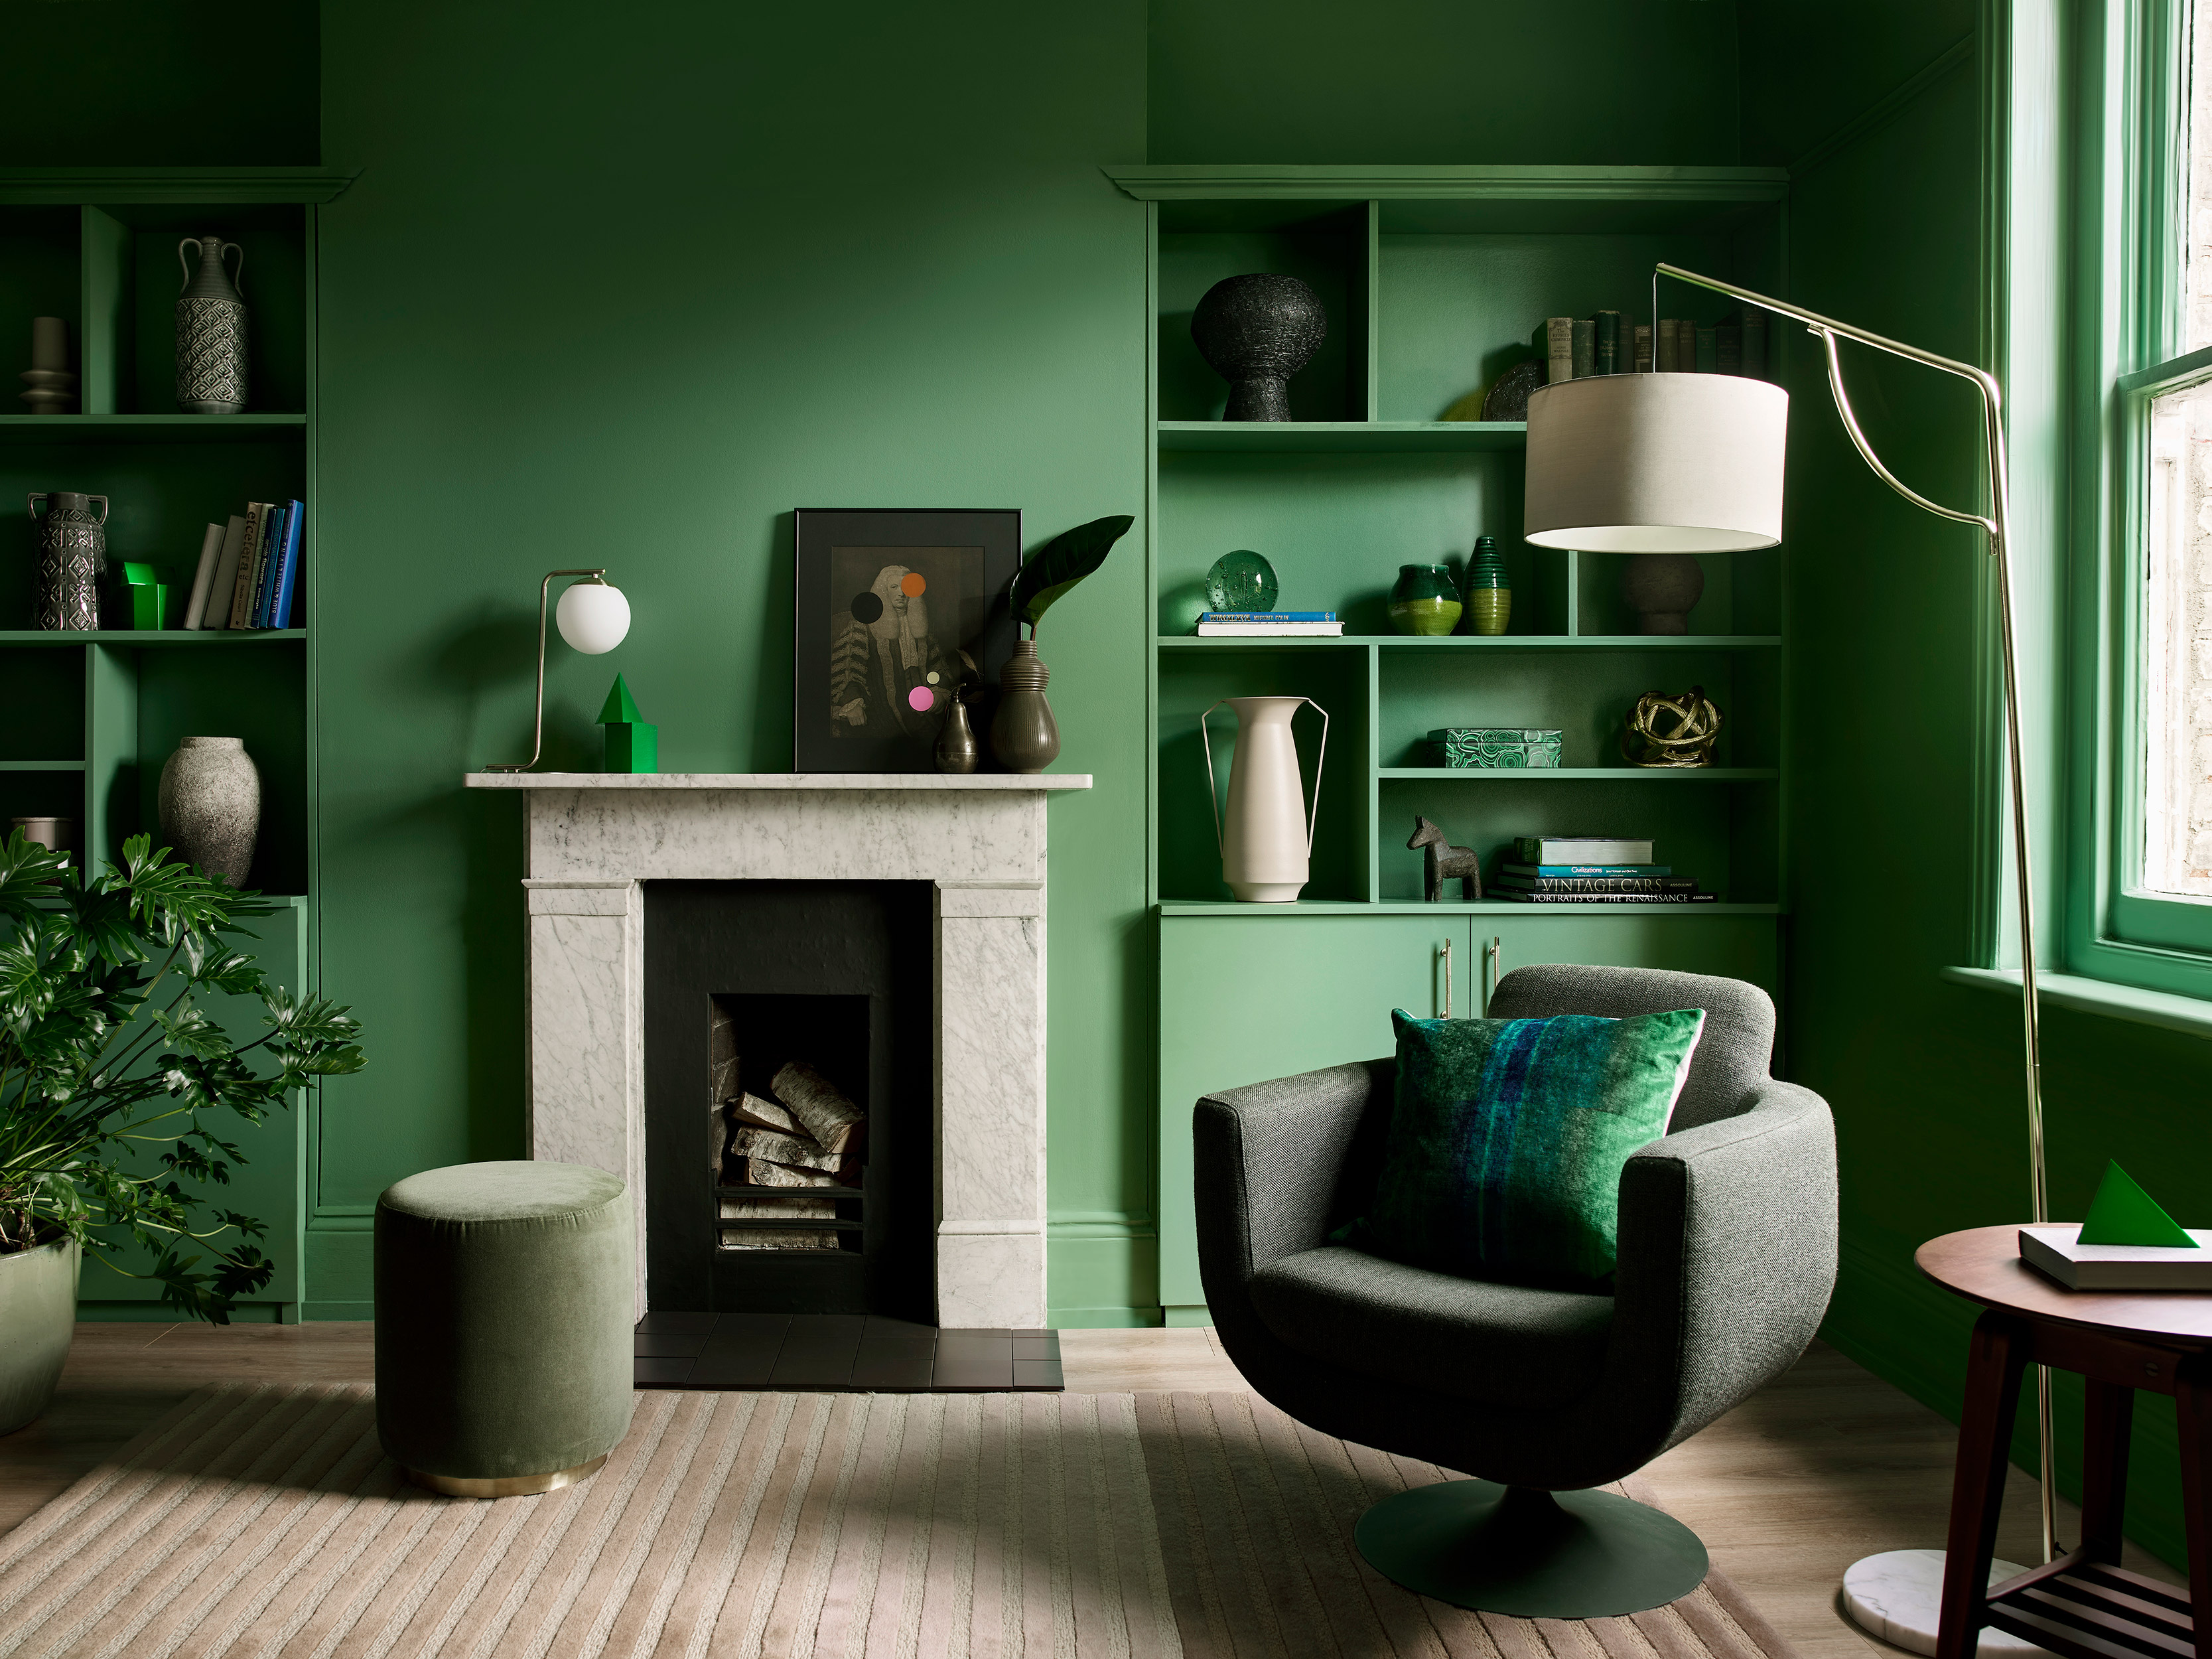 Dulux Heritage Dh Grass Green Living Room